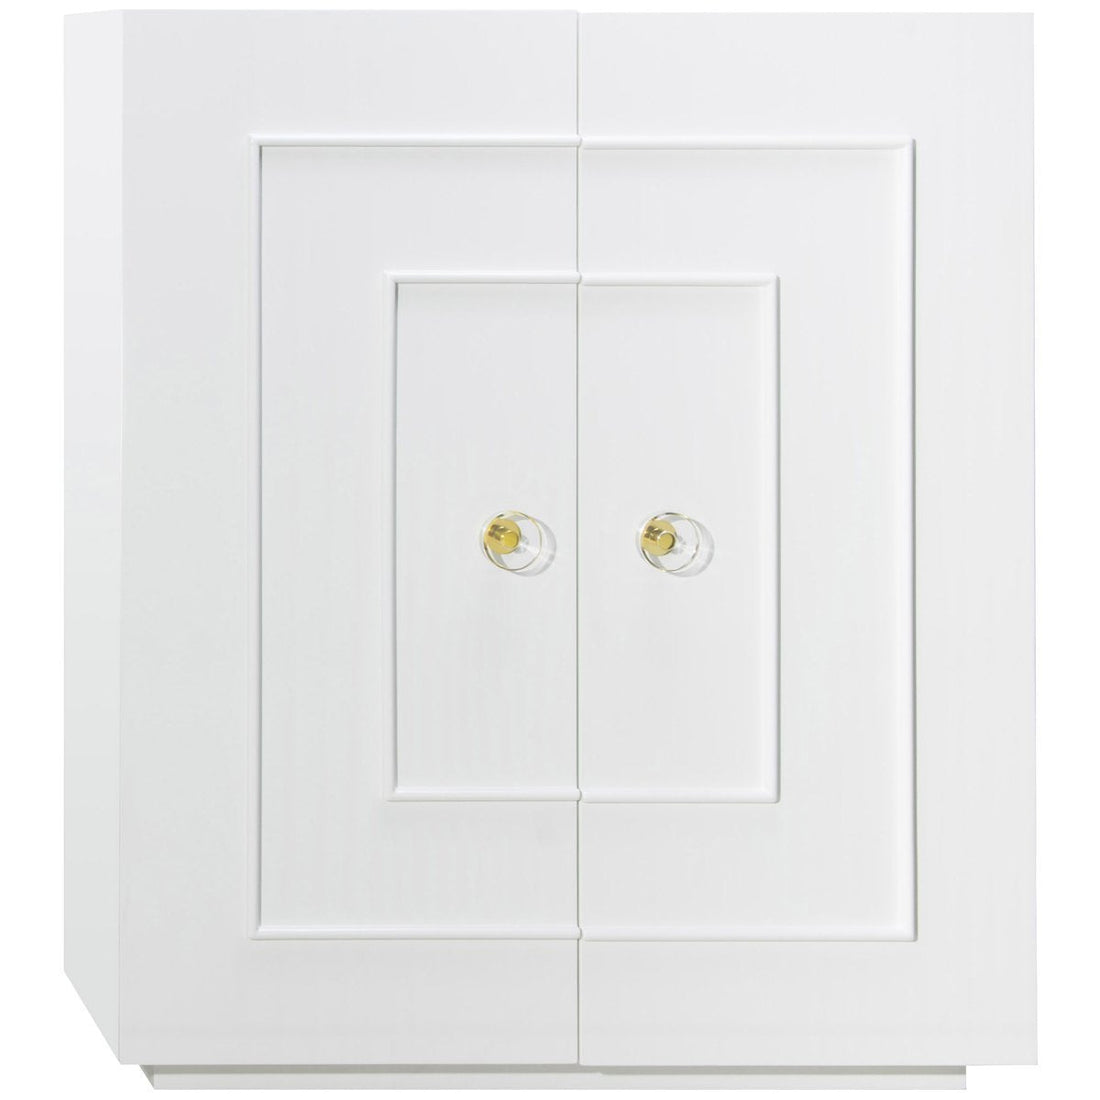 Worlds Away Judd Two-Door Dorm Cabinet in Matte White Lacquer